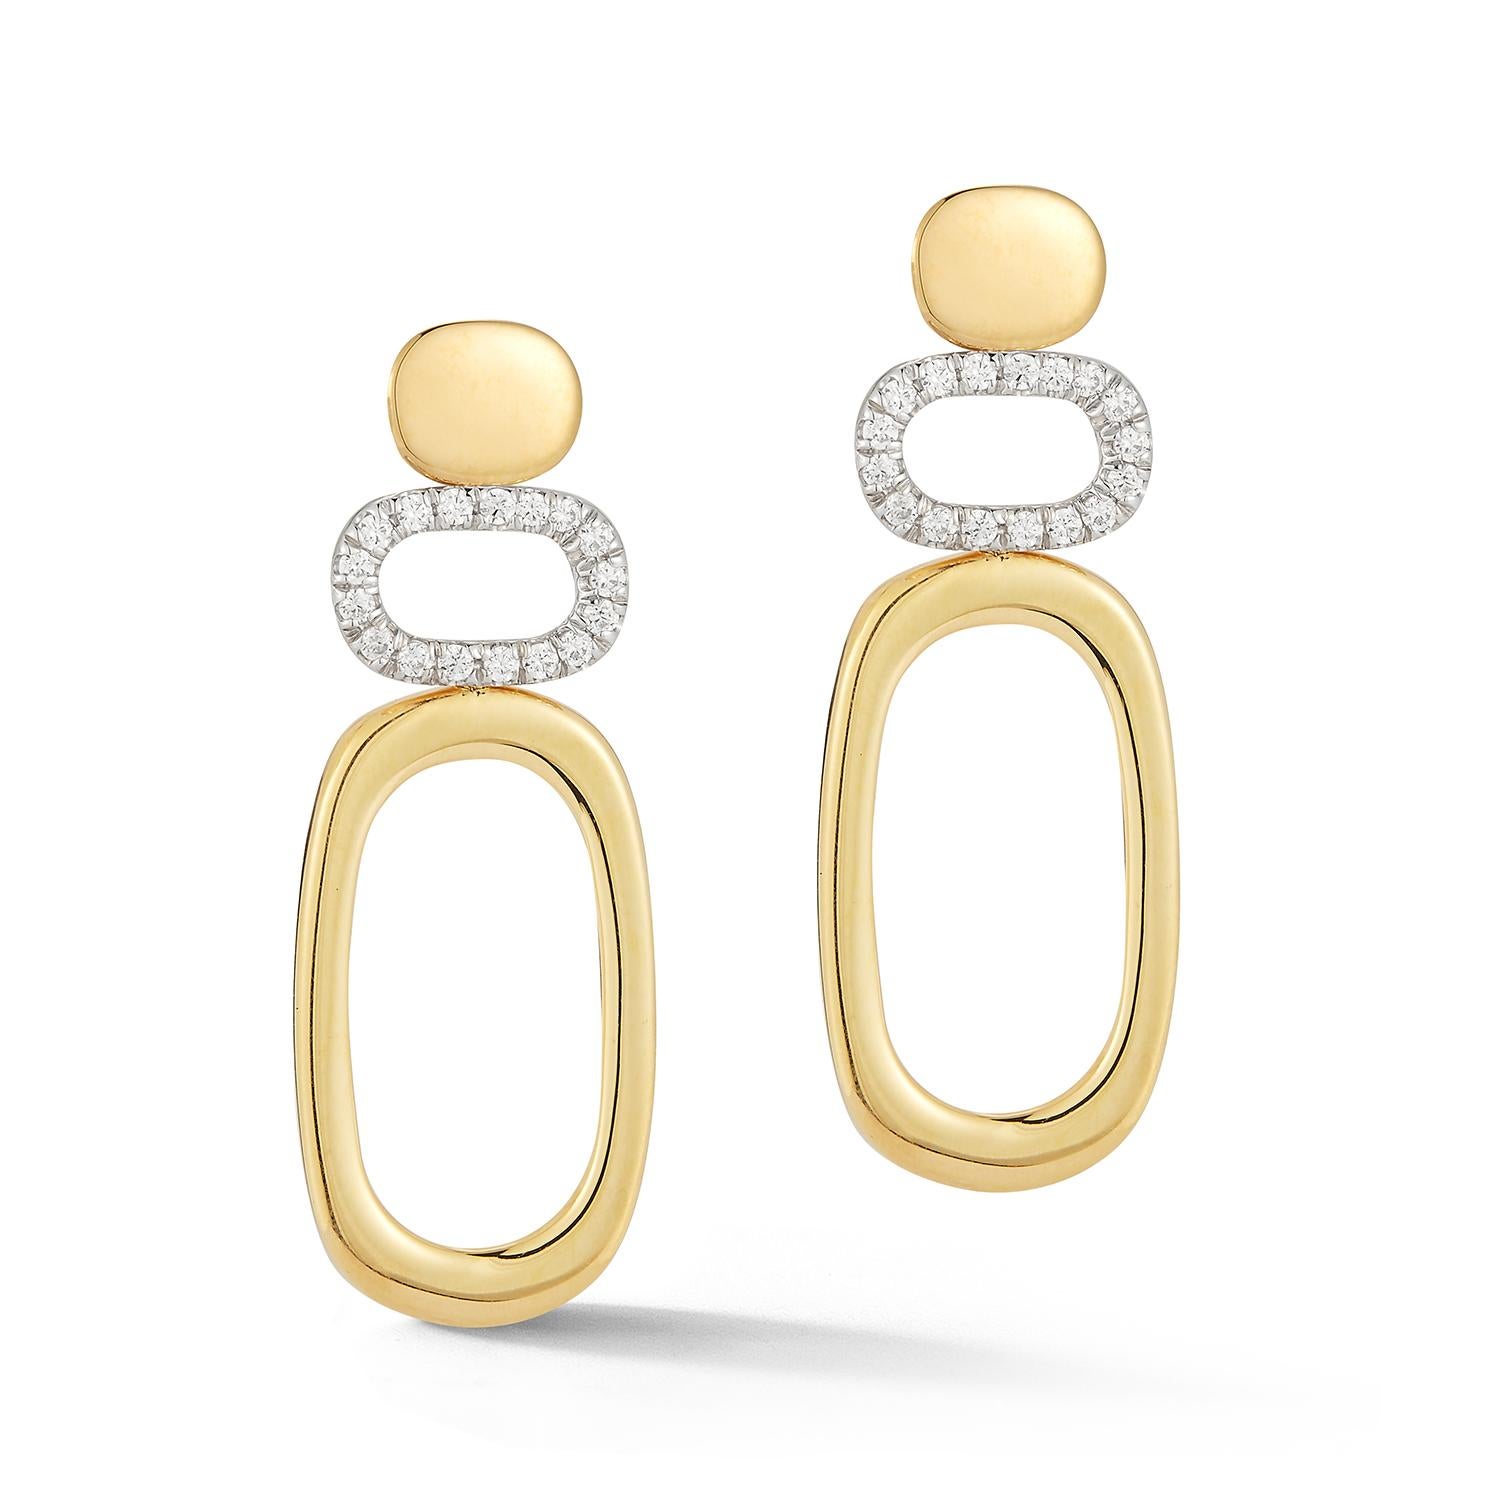 14 Karat Yellow Gold Hand-Crafted High-Polish Finished Dangling Open Geometrical Earrings, Accented with 0.34 Carats of Pave Set Diamonds.  Post with Friction Closure.
